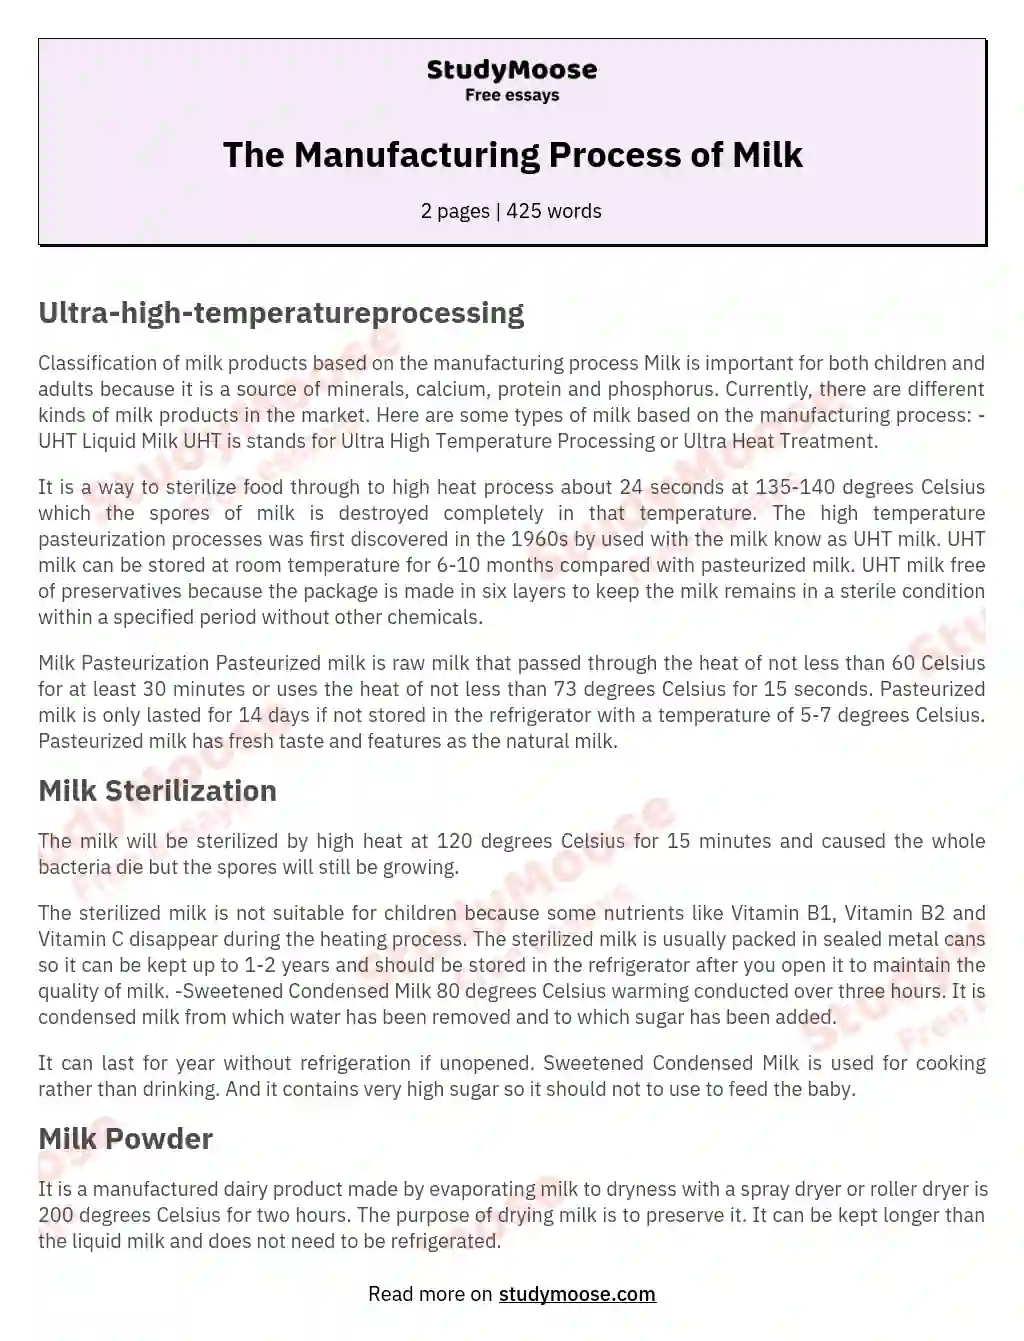 The Manufacturing Process of Milk essay